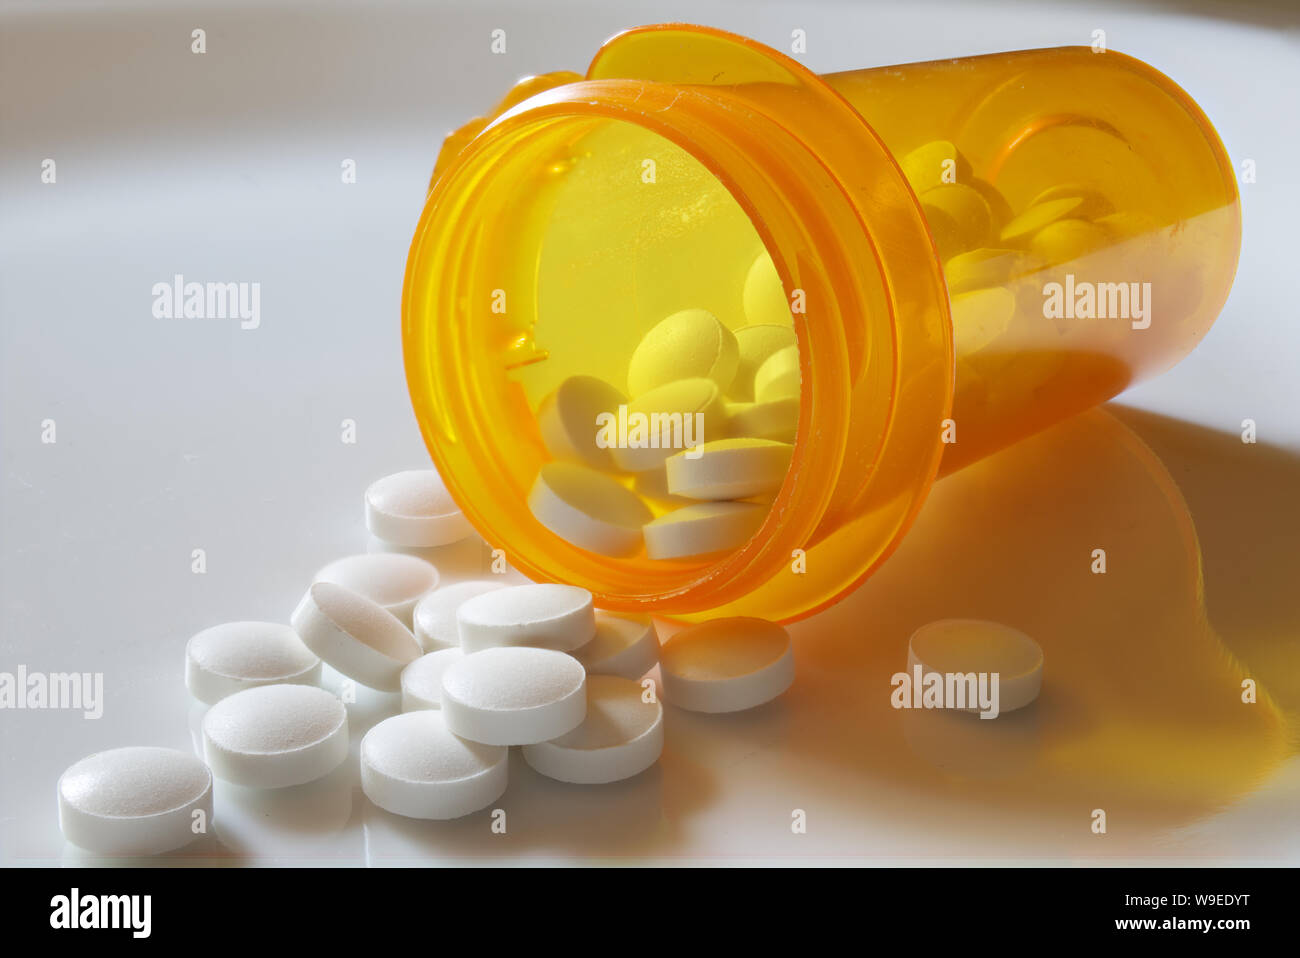 White pills falling out of an unlabeled amber pill bottle lying on its side Stock Photo